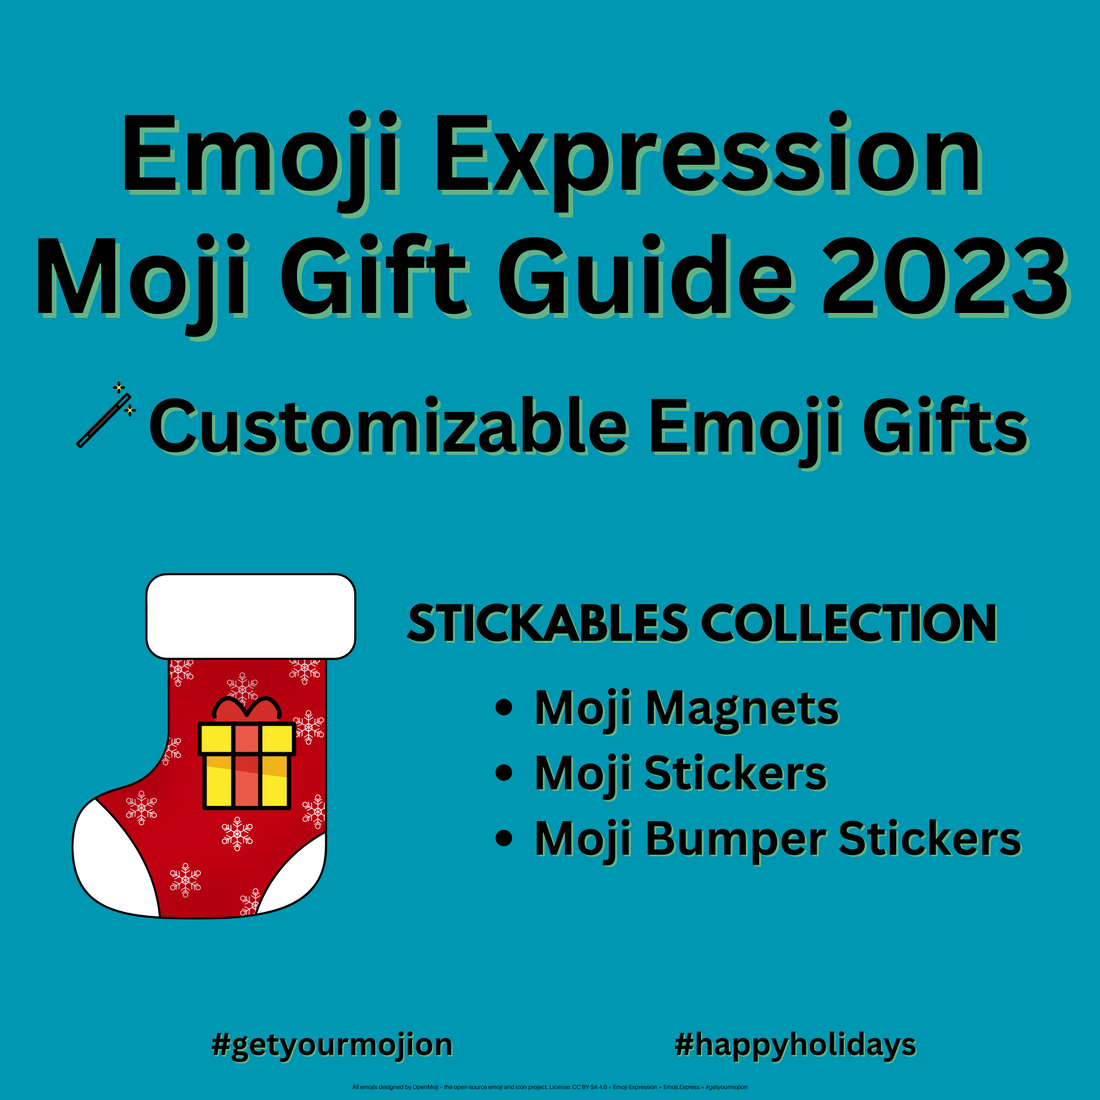 The Emoji Stickables Gift Guide for 2023! 🎁